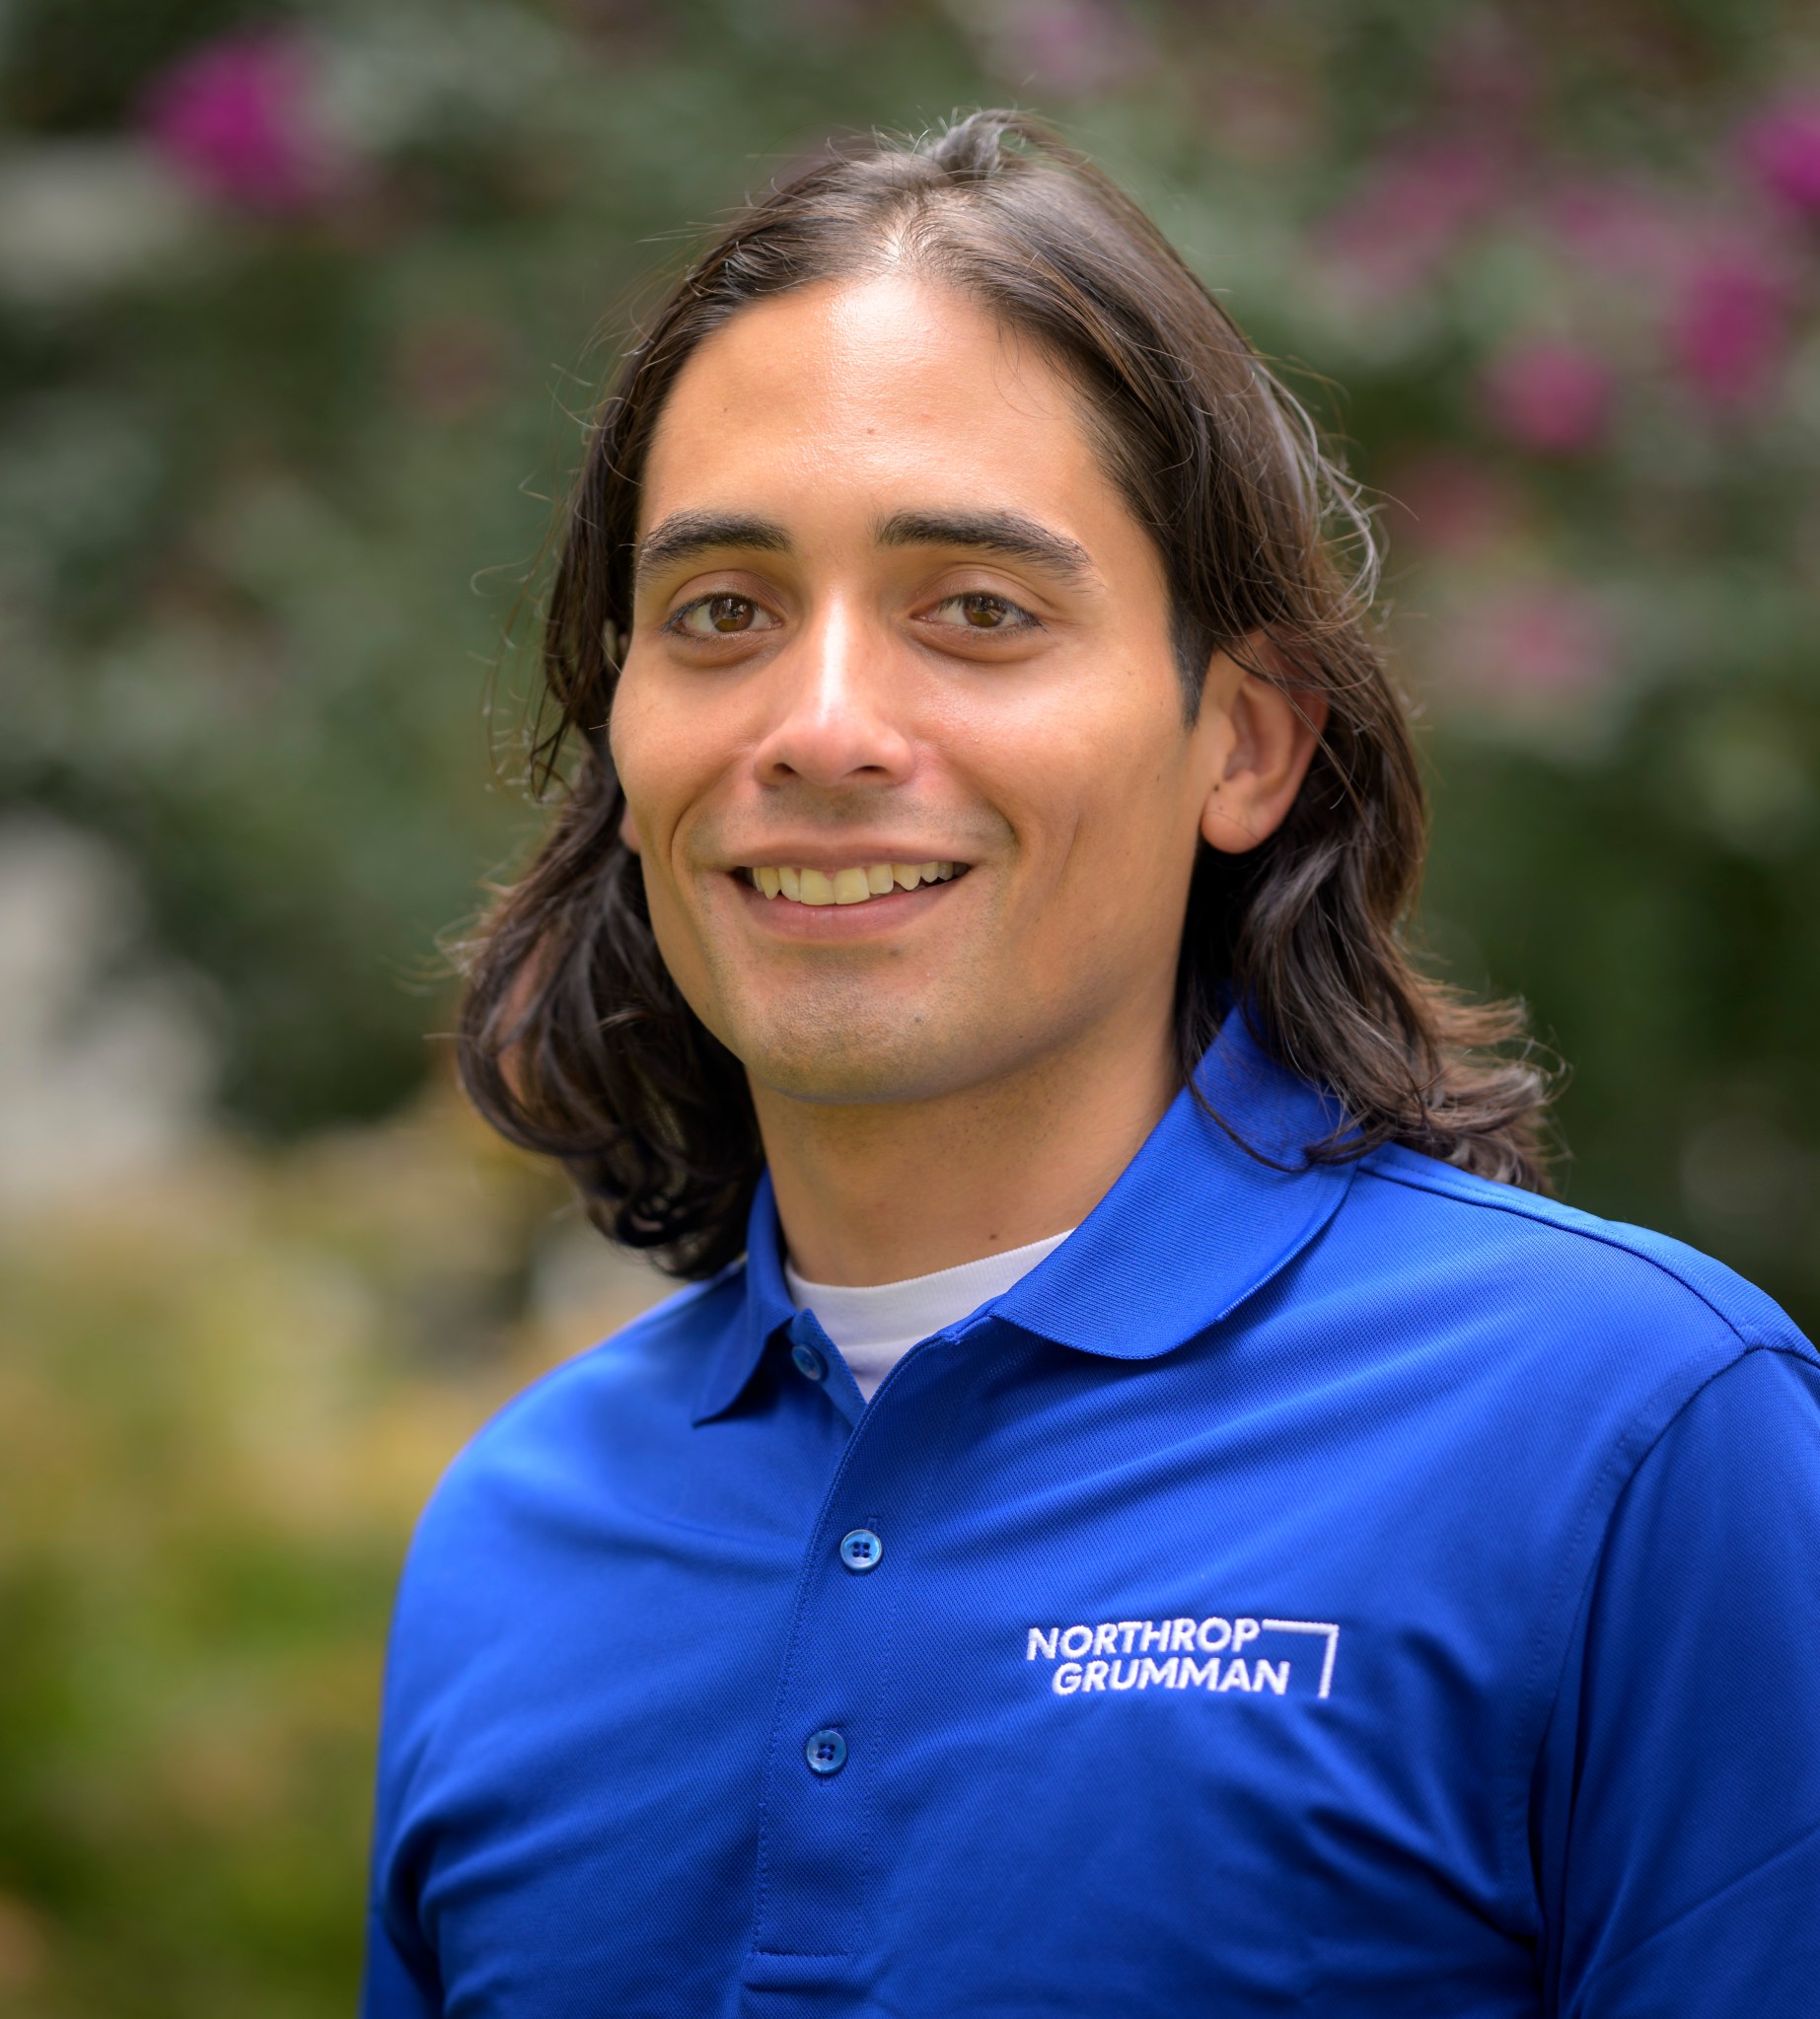 A portrait of Northrop Grumman engineer Oliver Ortiz, who has shoulder-length brown hair, is wearing a blue shirt with the Northrop Grumman logo on the left breast, as he flashes a smile and stands in front of some green and magenta-speckled foliage.